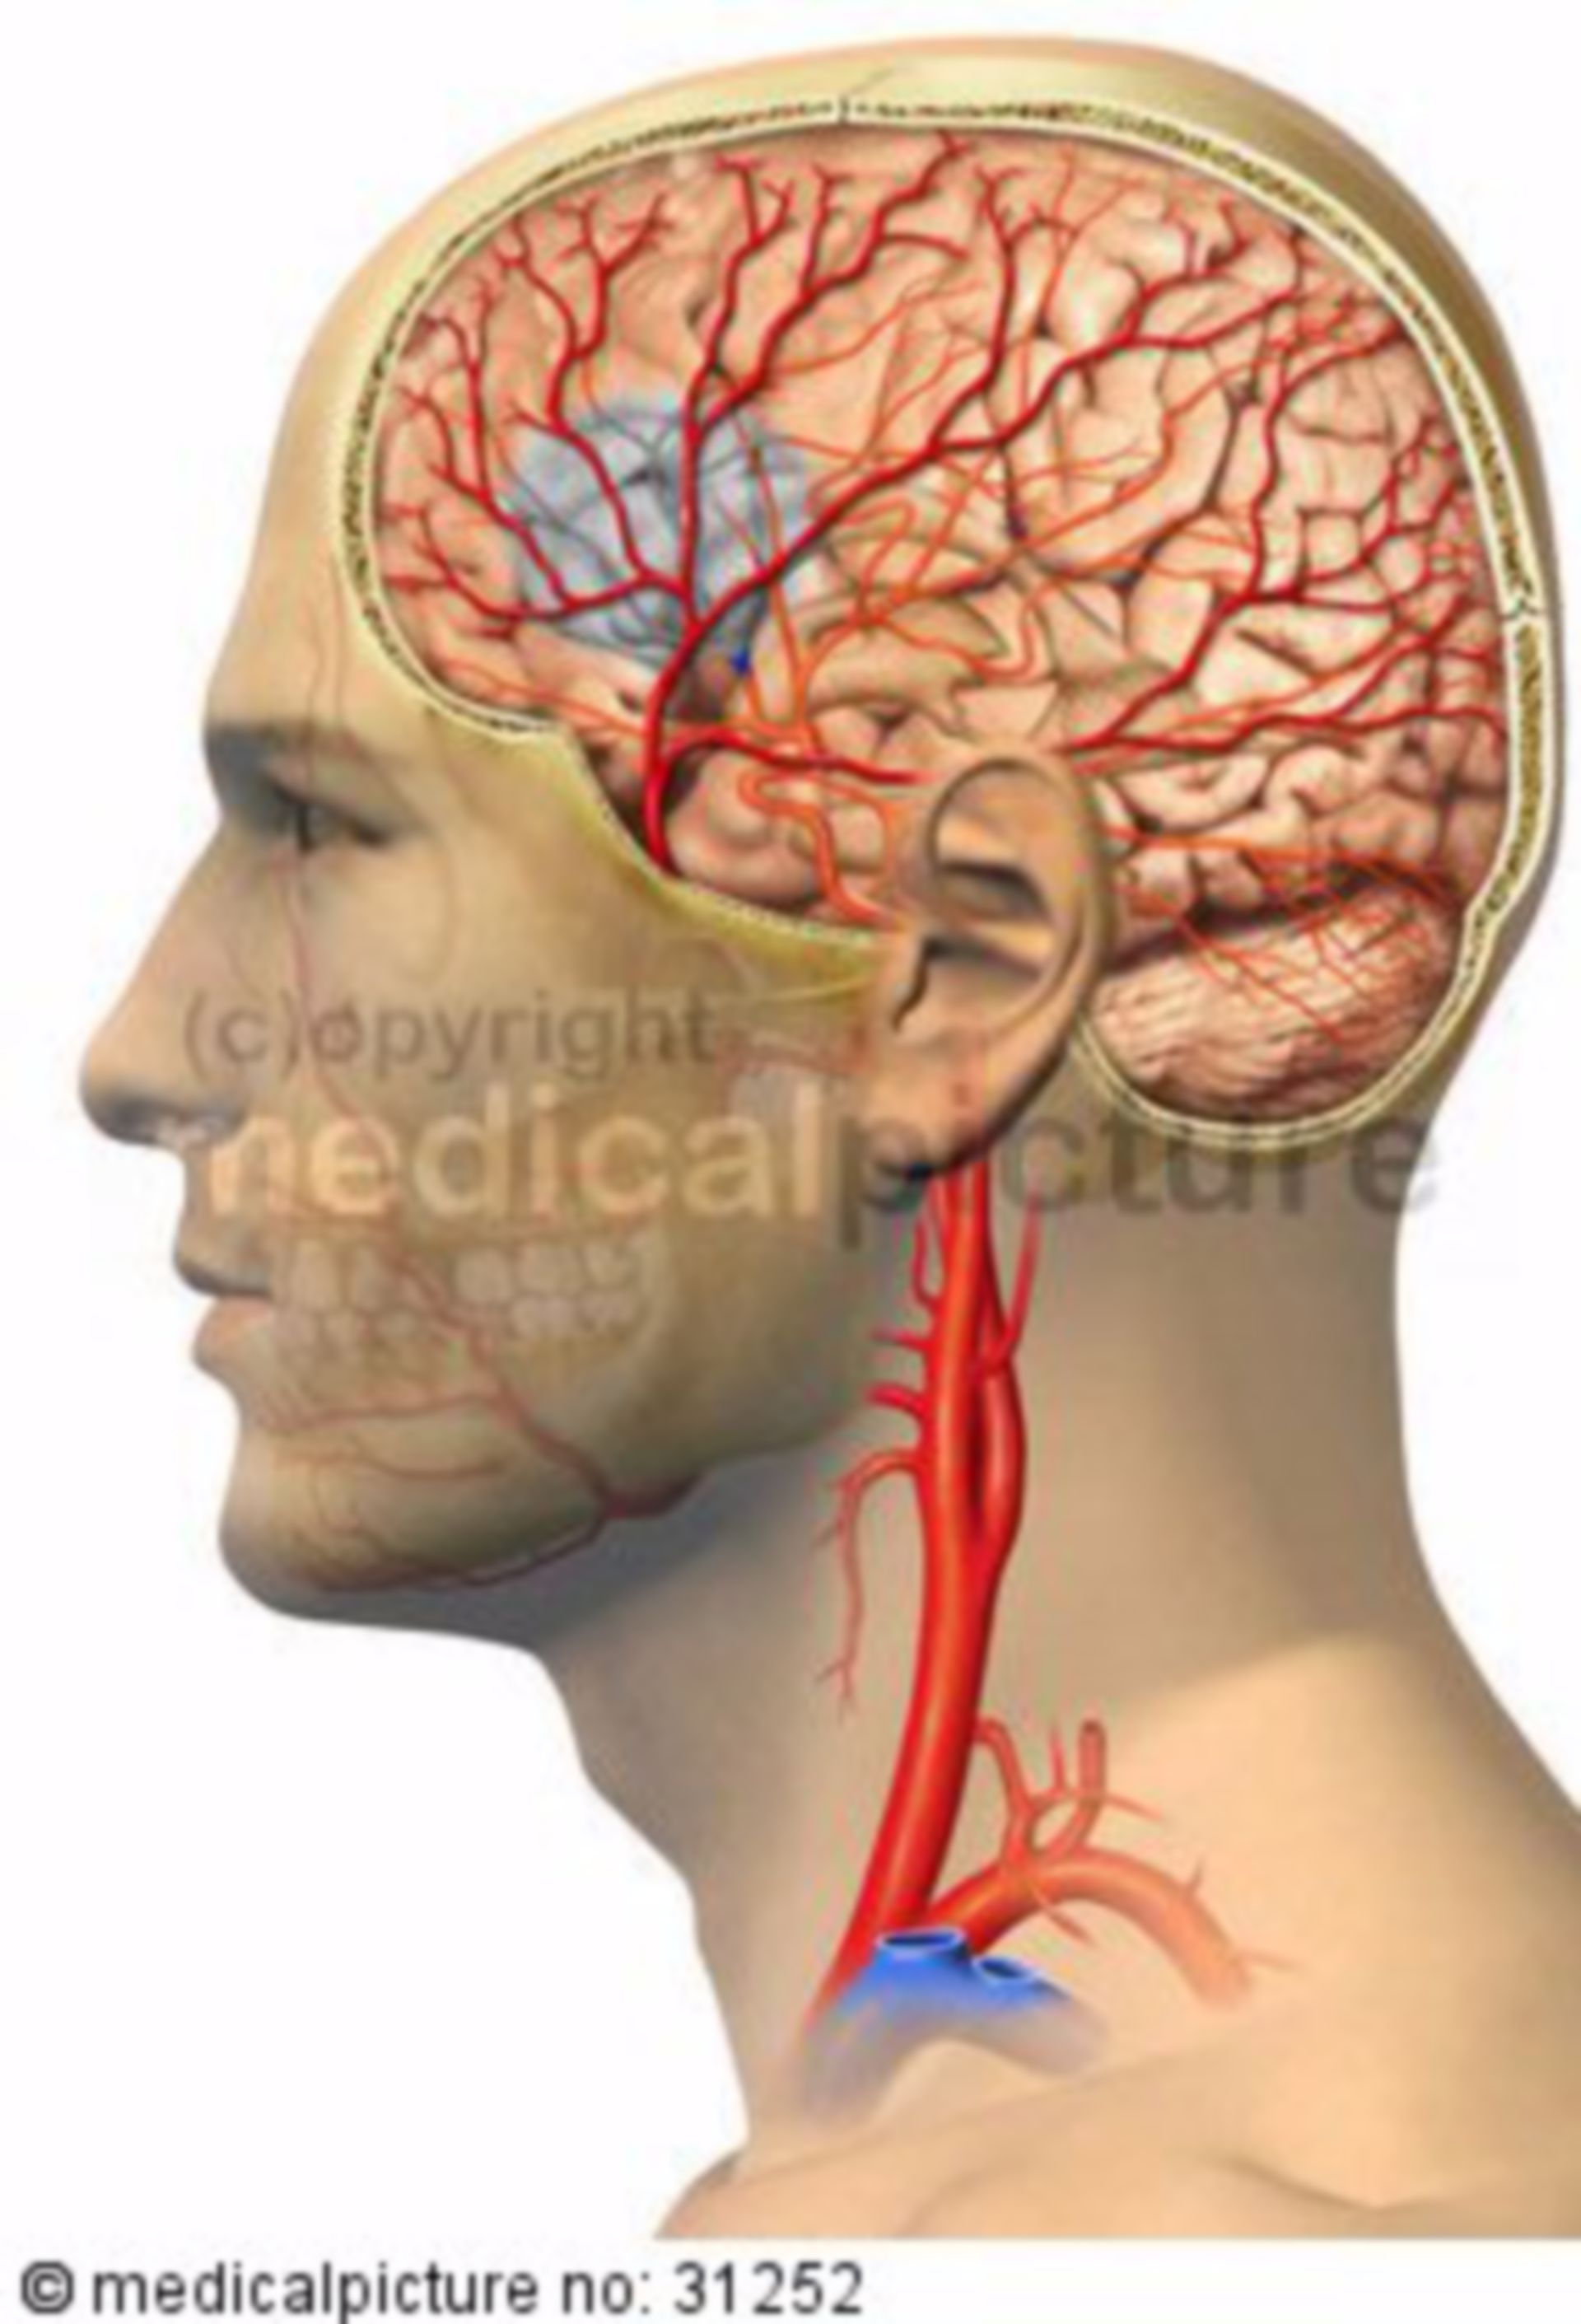 Stroke cause by a Thrombus